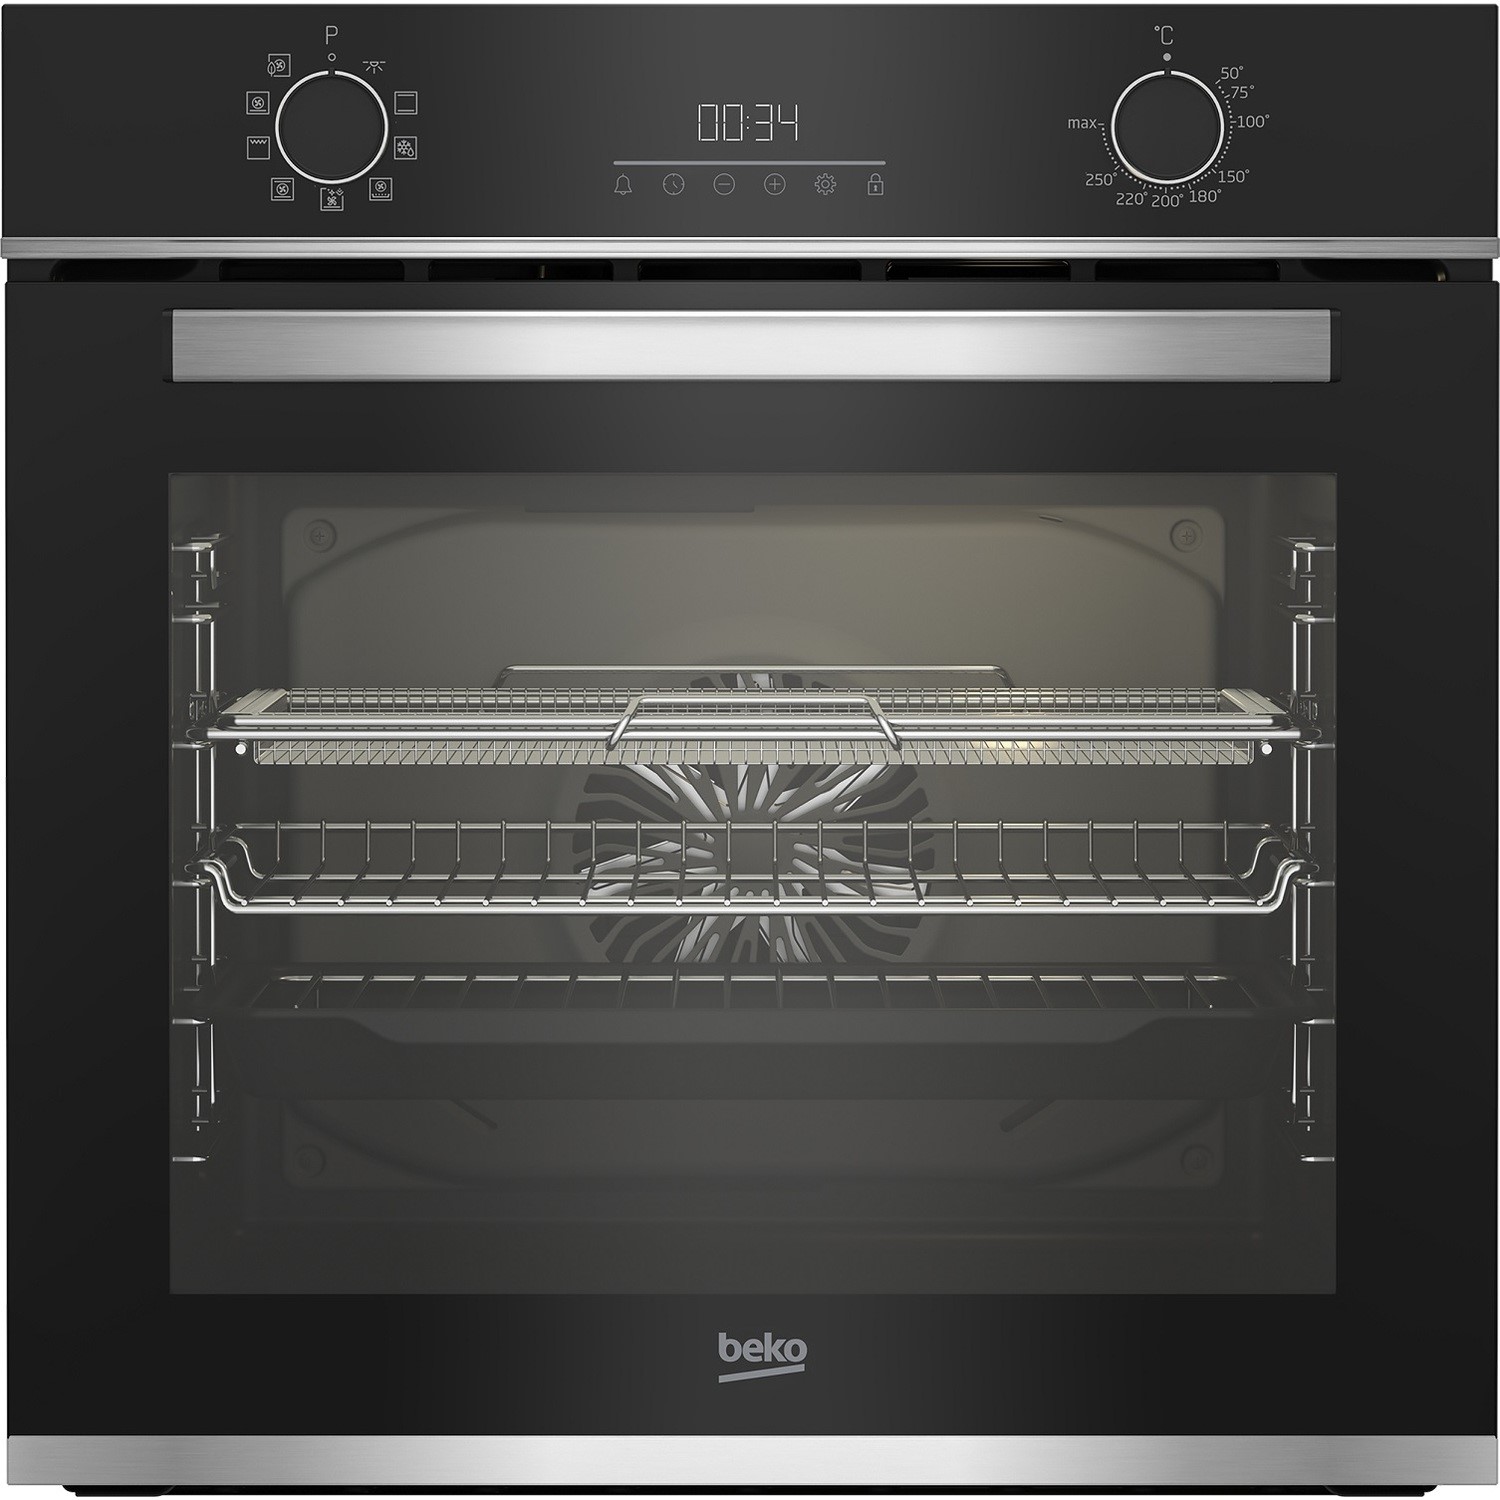 Photos - Other for Computer Beko Multi-Function Electric Single Oven - Stainless Steel BBIMA13300XC 